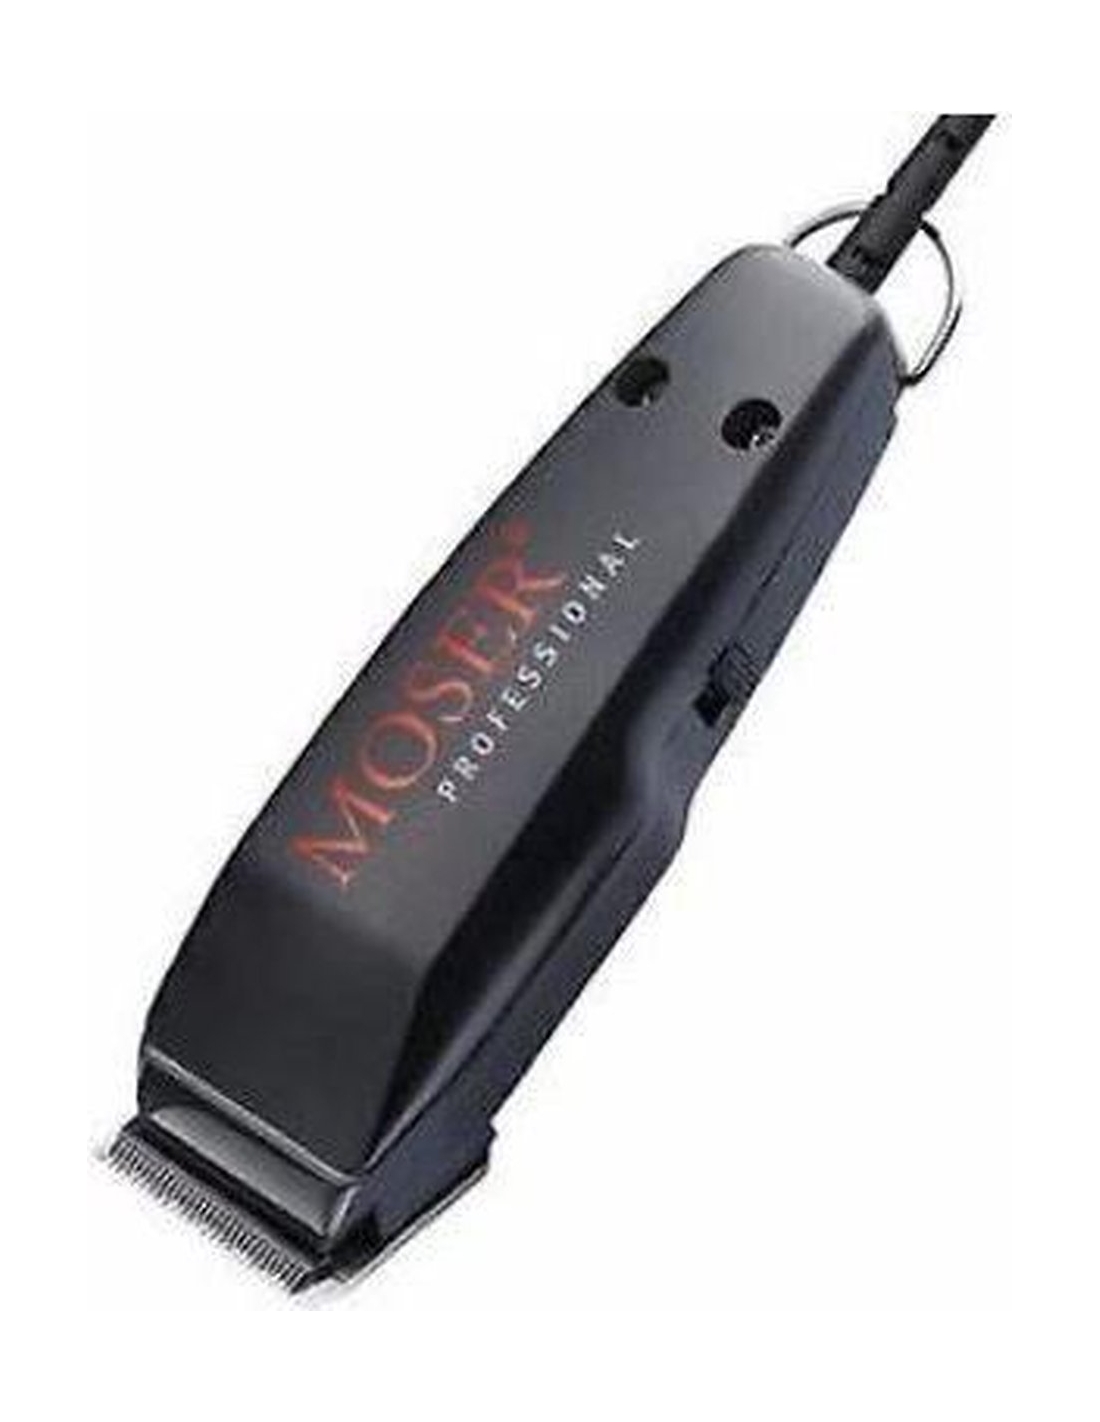 MOSER 1400 White - Professional Corded Hair Clipper